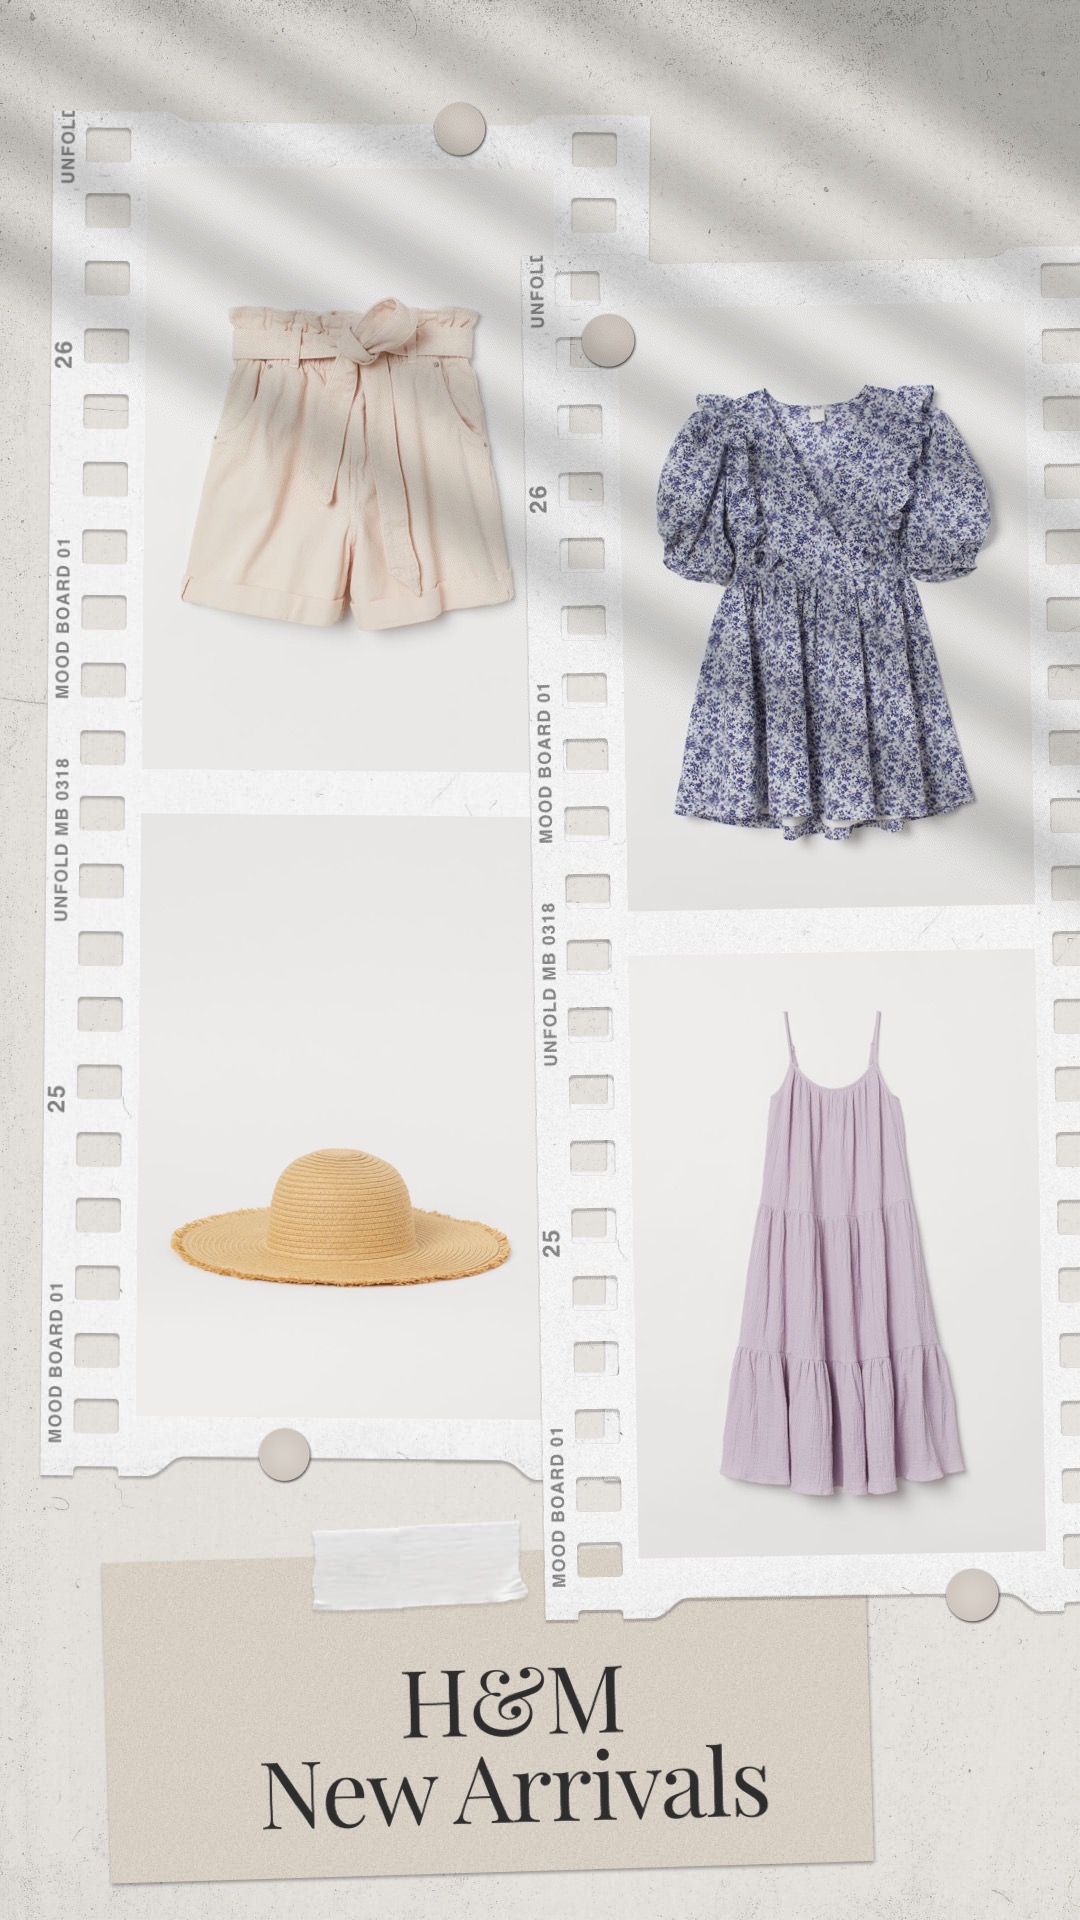 H&M Summer Collection 2020 | $29.99 Shorts in thick cotton denim. High paper-bag waist with elasticized waistband | Calf-length dress in double layers of woven cotton fabric with a crinkled texture. | $14.99 Hat in braided paper straw with fringe-trimmed brim. 